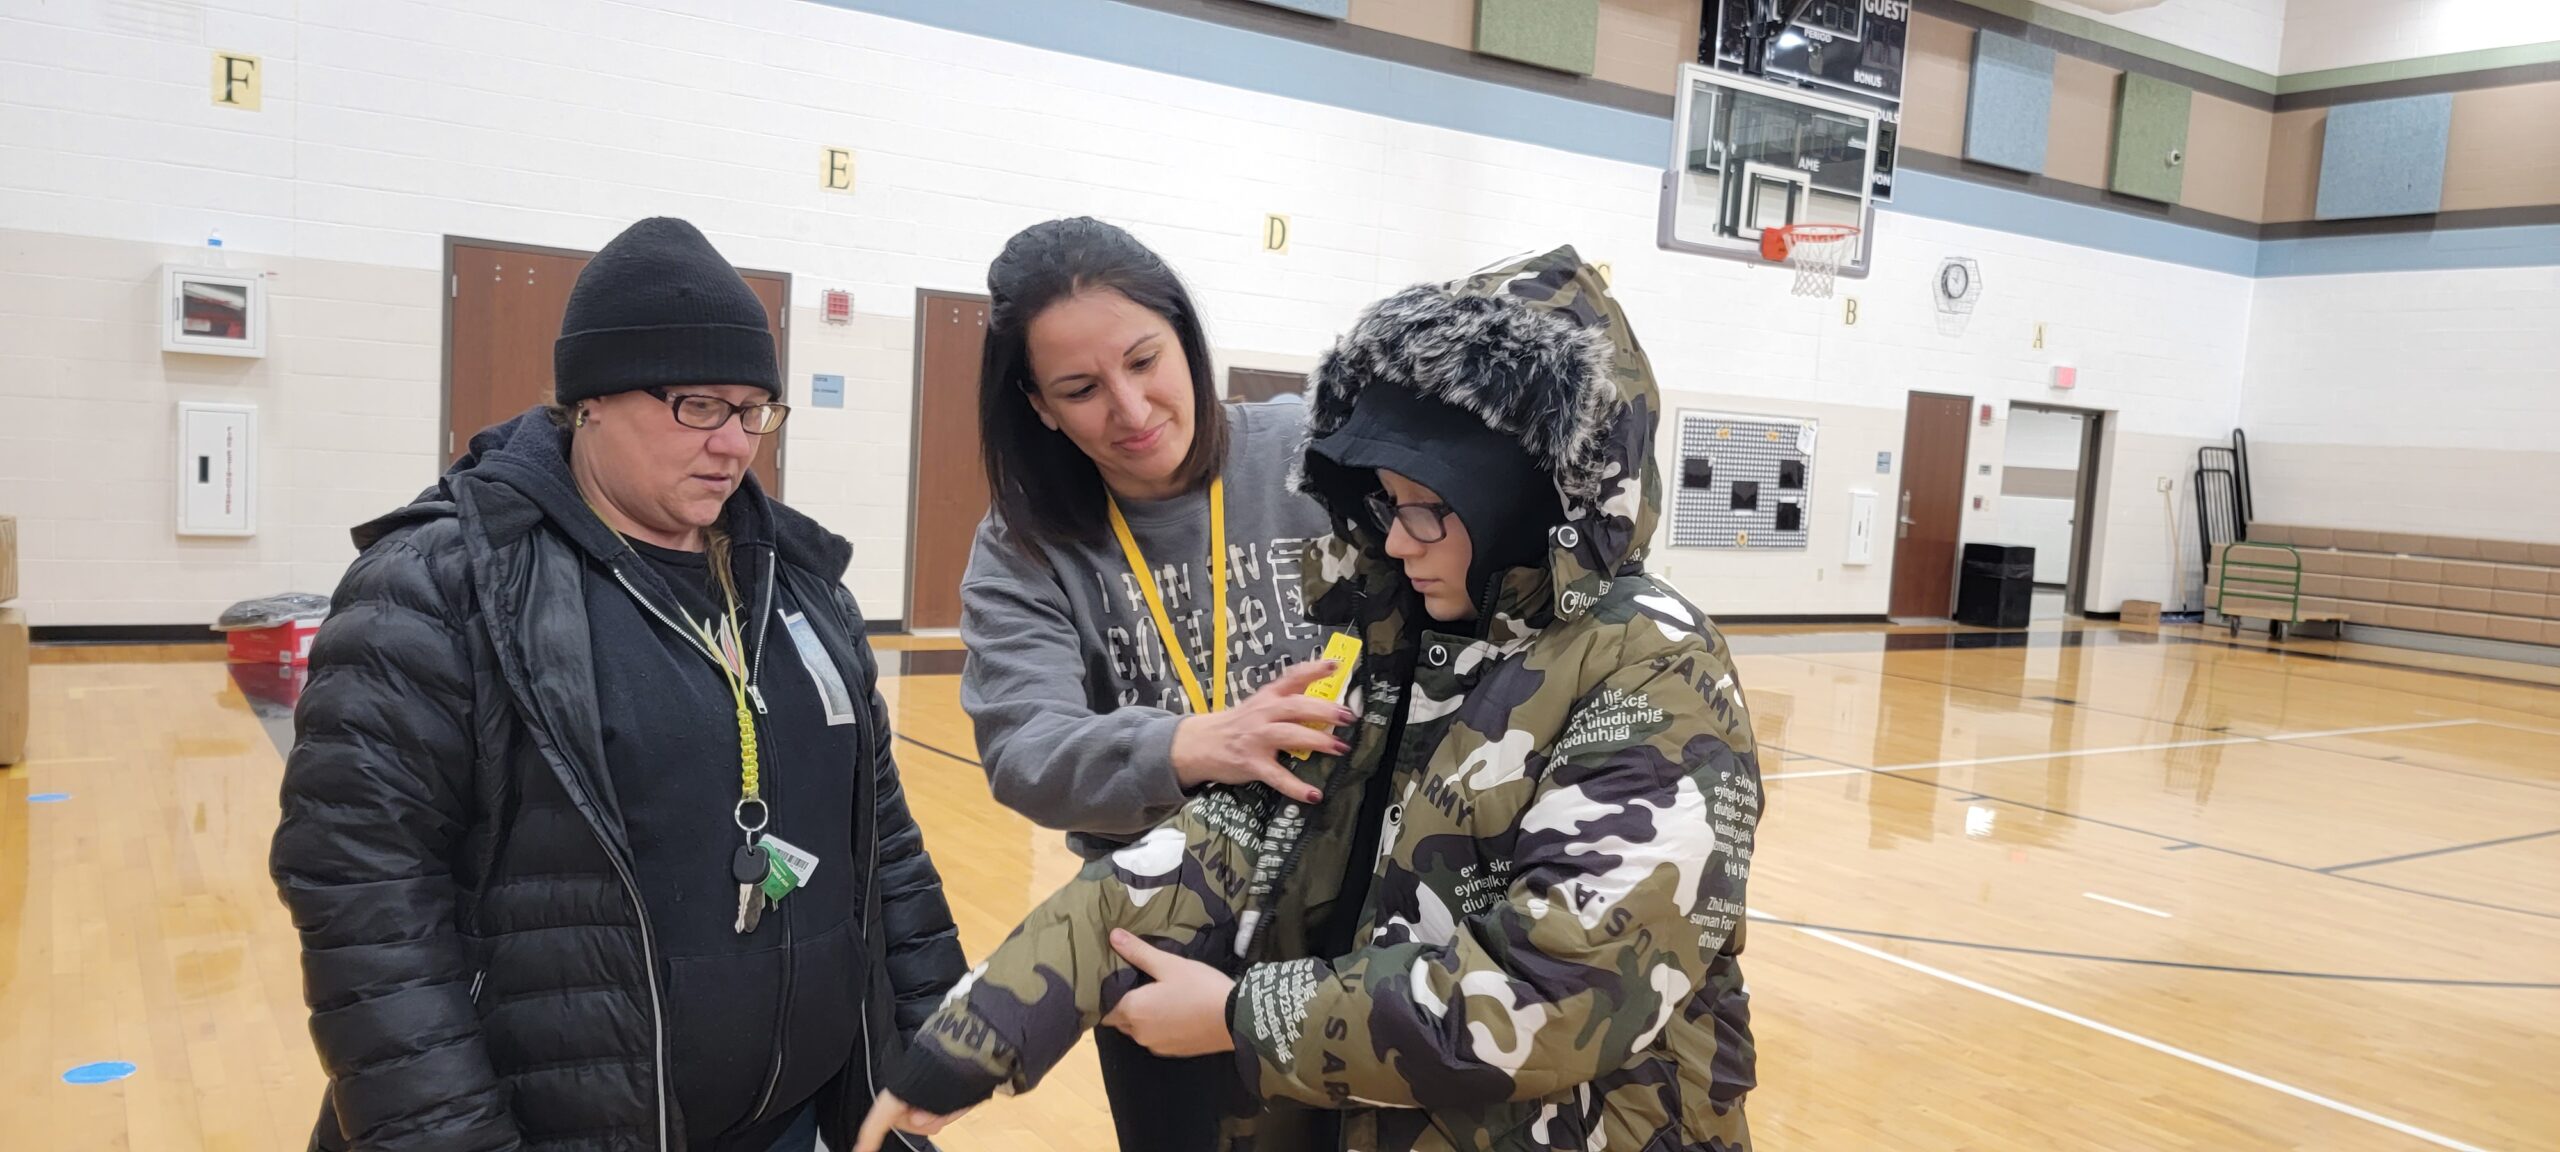 WCS students bundle up for winter thanks to donation by Berk Enterprises